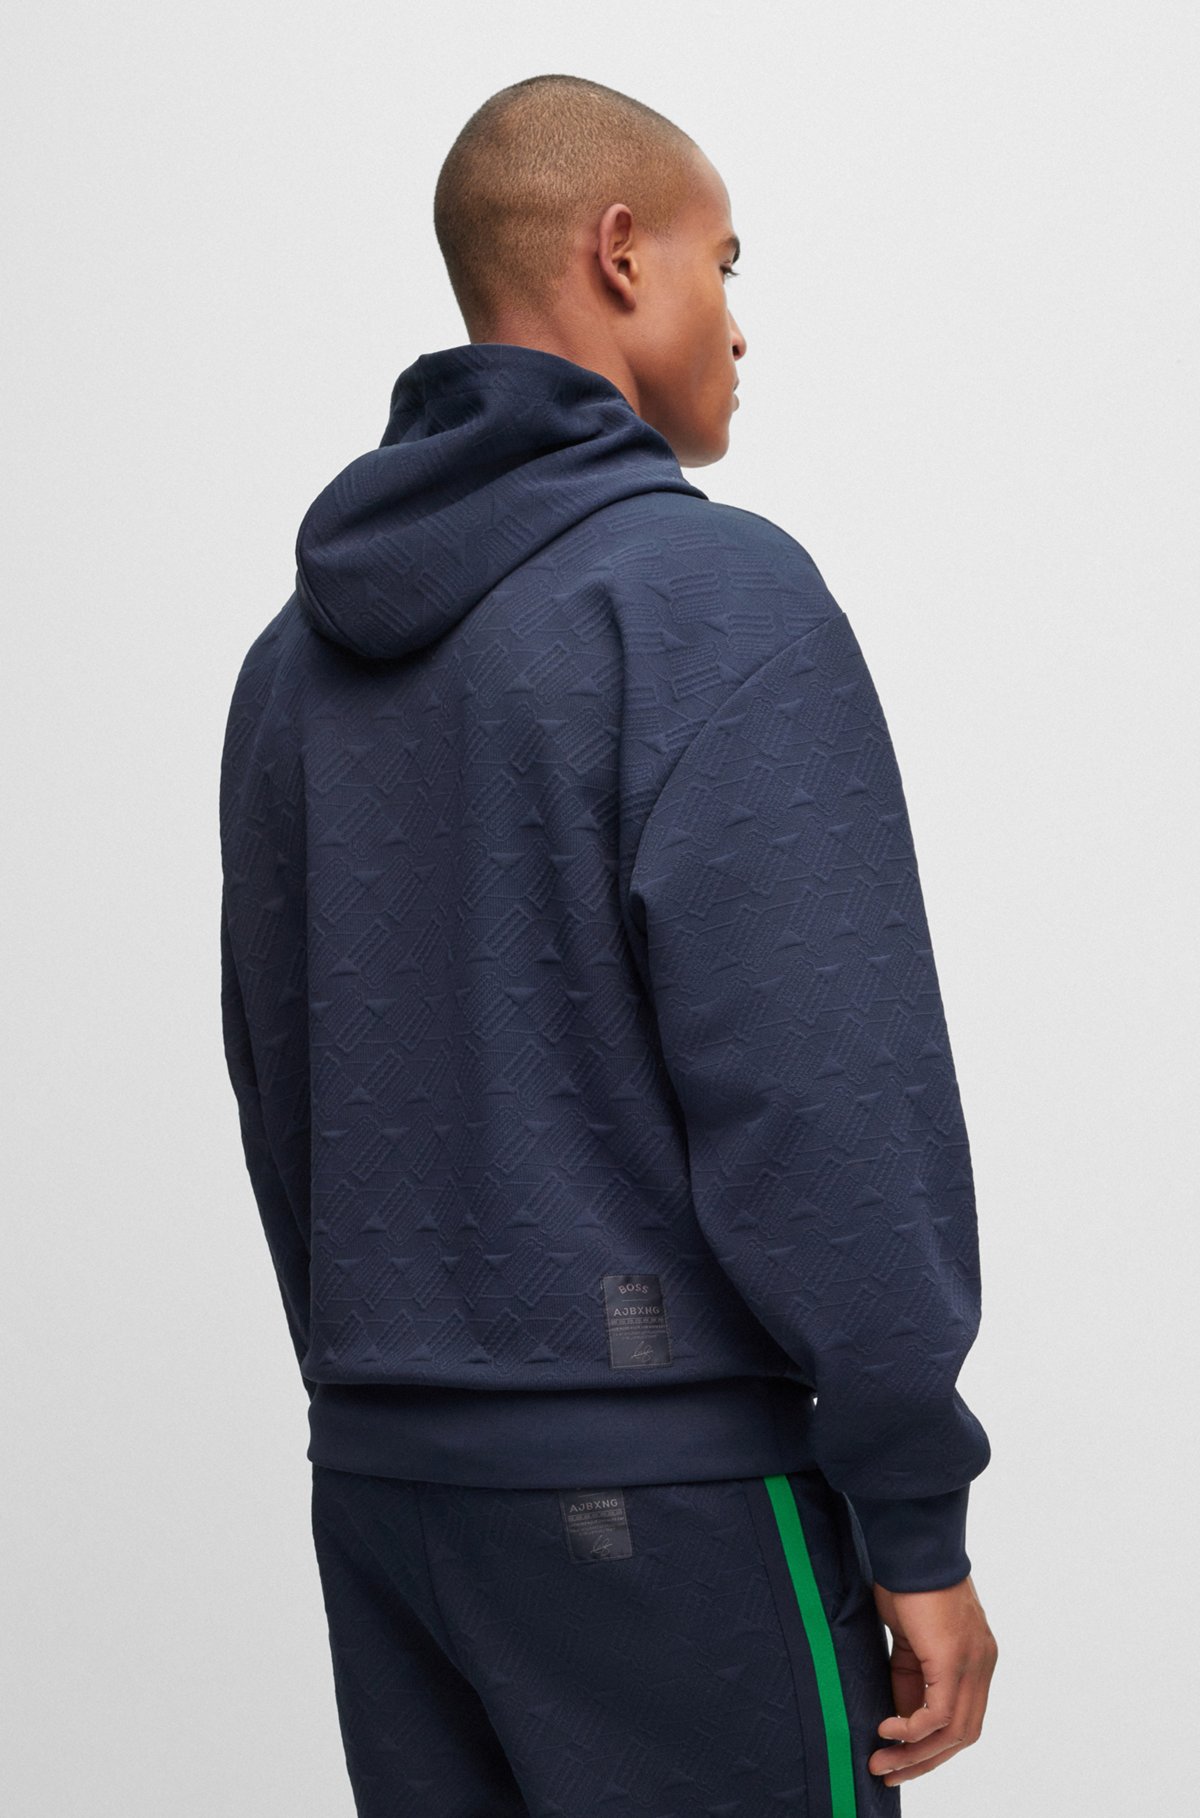 BOSS - BOSS x AJBXNG relaxed-fit hoodie with all-over monogram jacquard